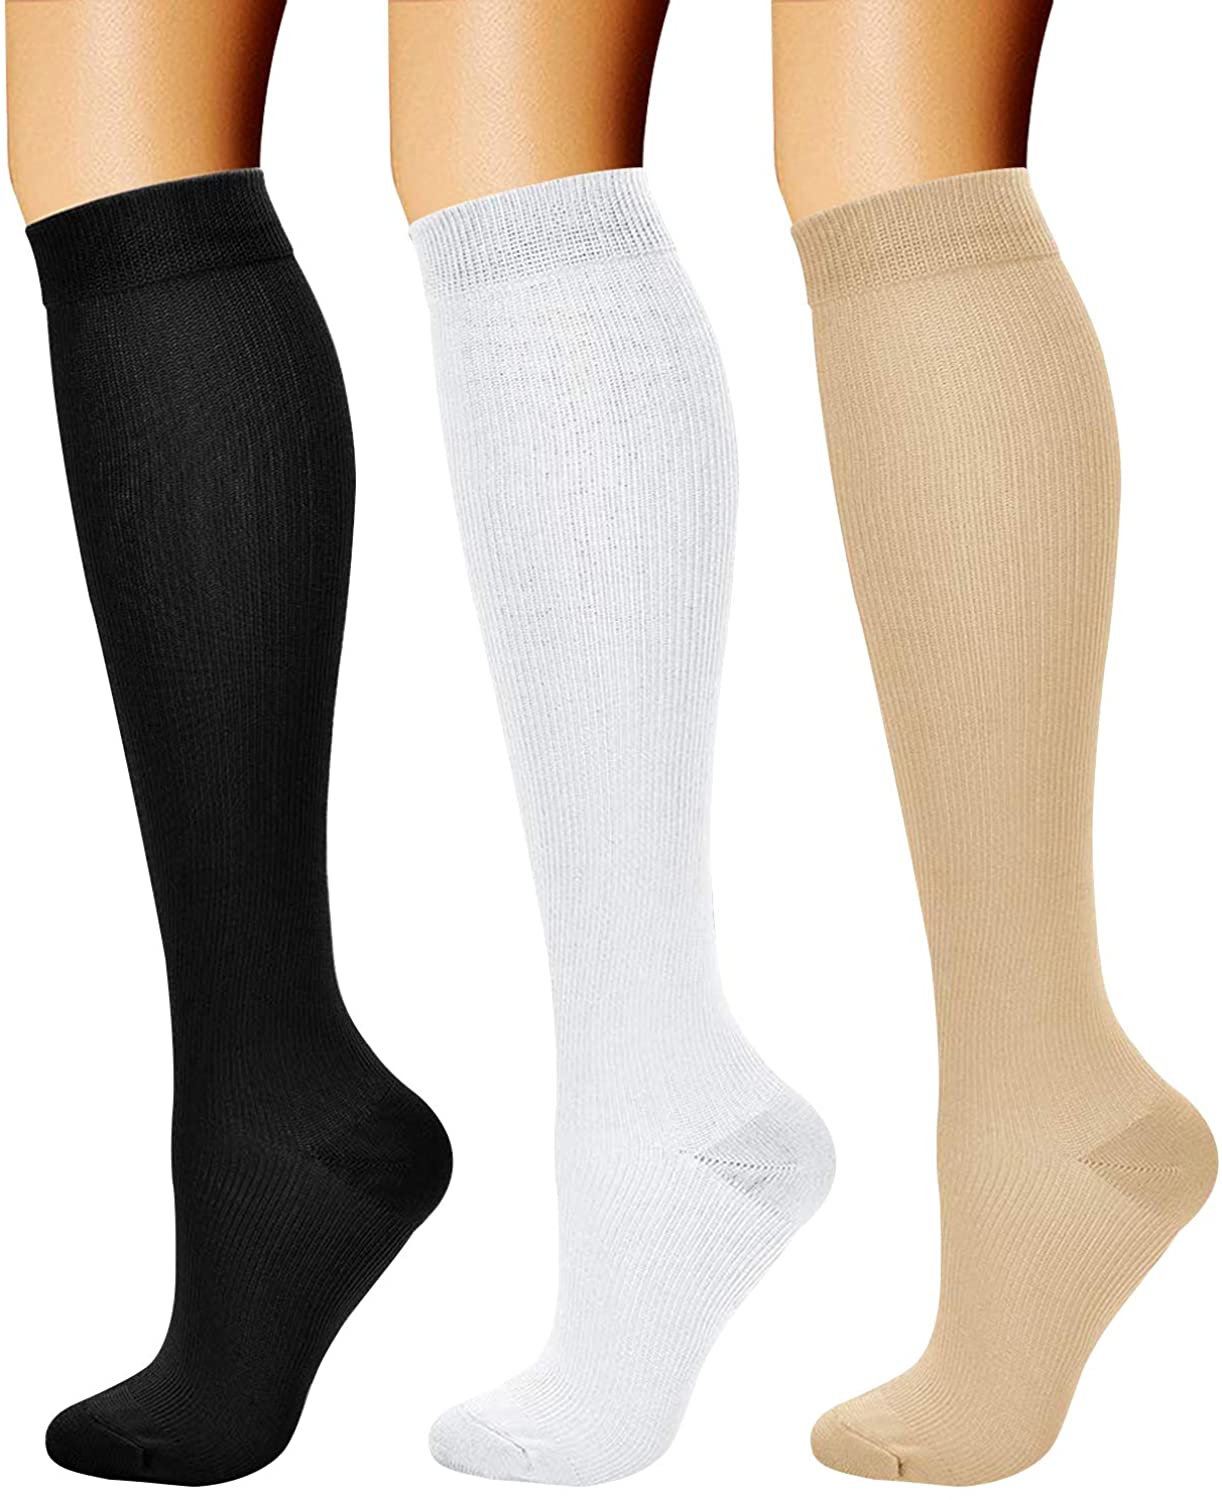 15 Day Return Policy Charmking 3 Pairs Copper Compression Socks For Women And Men Circulation 15